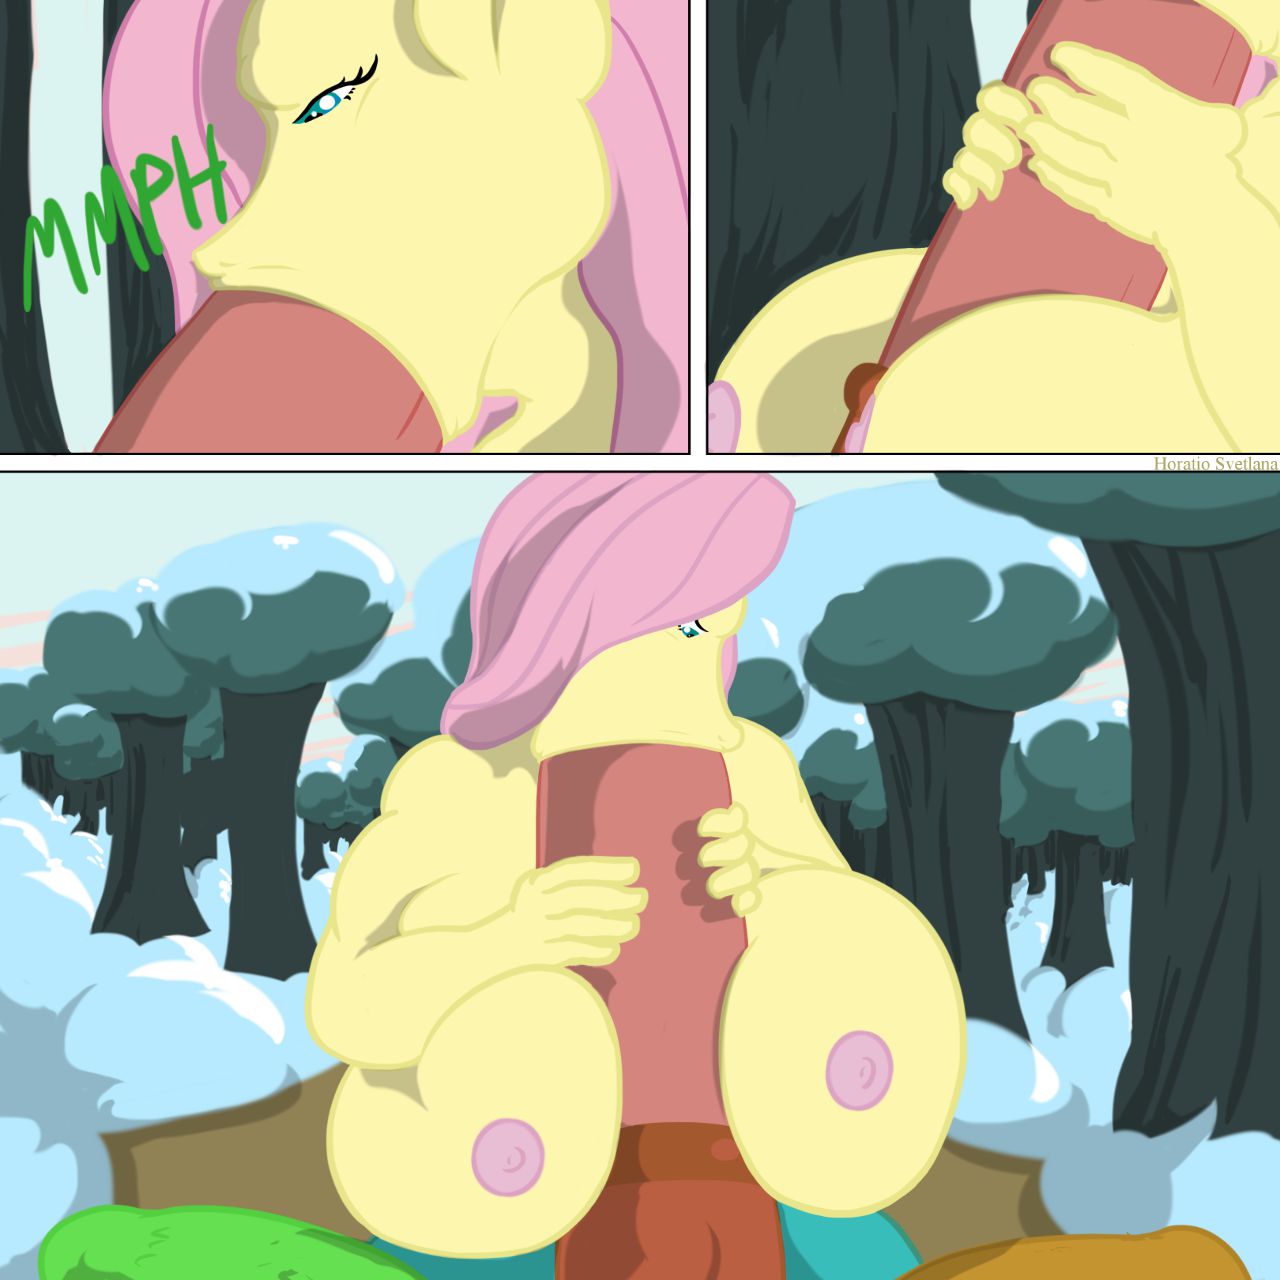 [Horatio Svetlana] Fluttershy's Discord Day (My Little Pony Friendship Is Magic) [Ongoing] 5